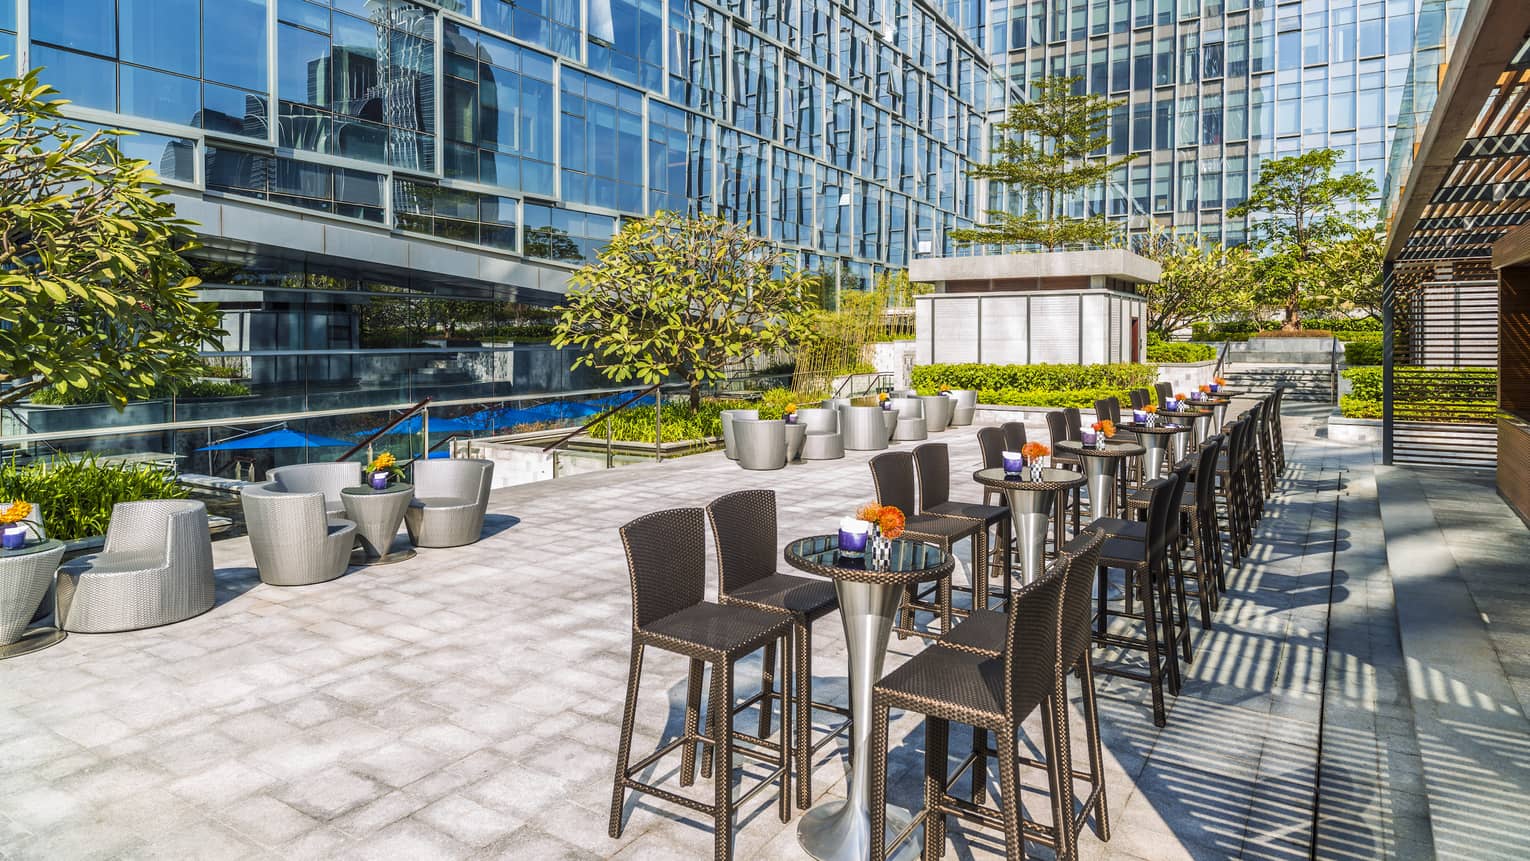 Patio tables and barstools, modern lounge chairs on sunny terrace under glass building